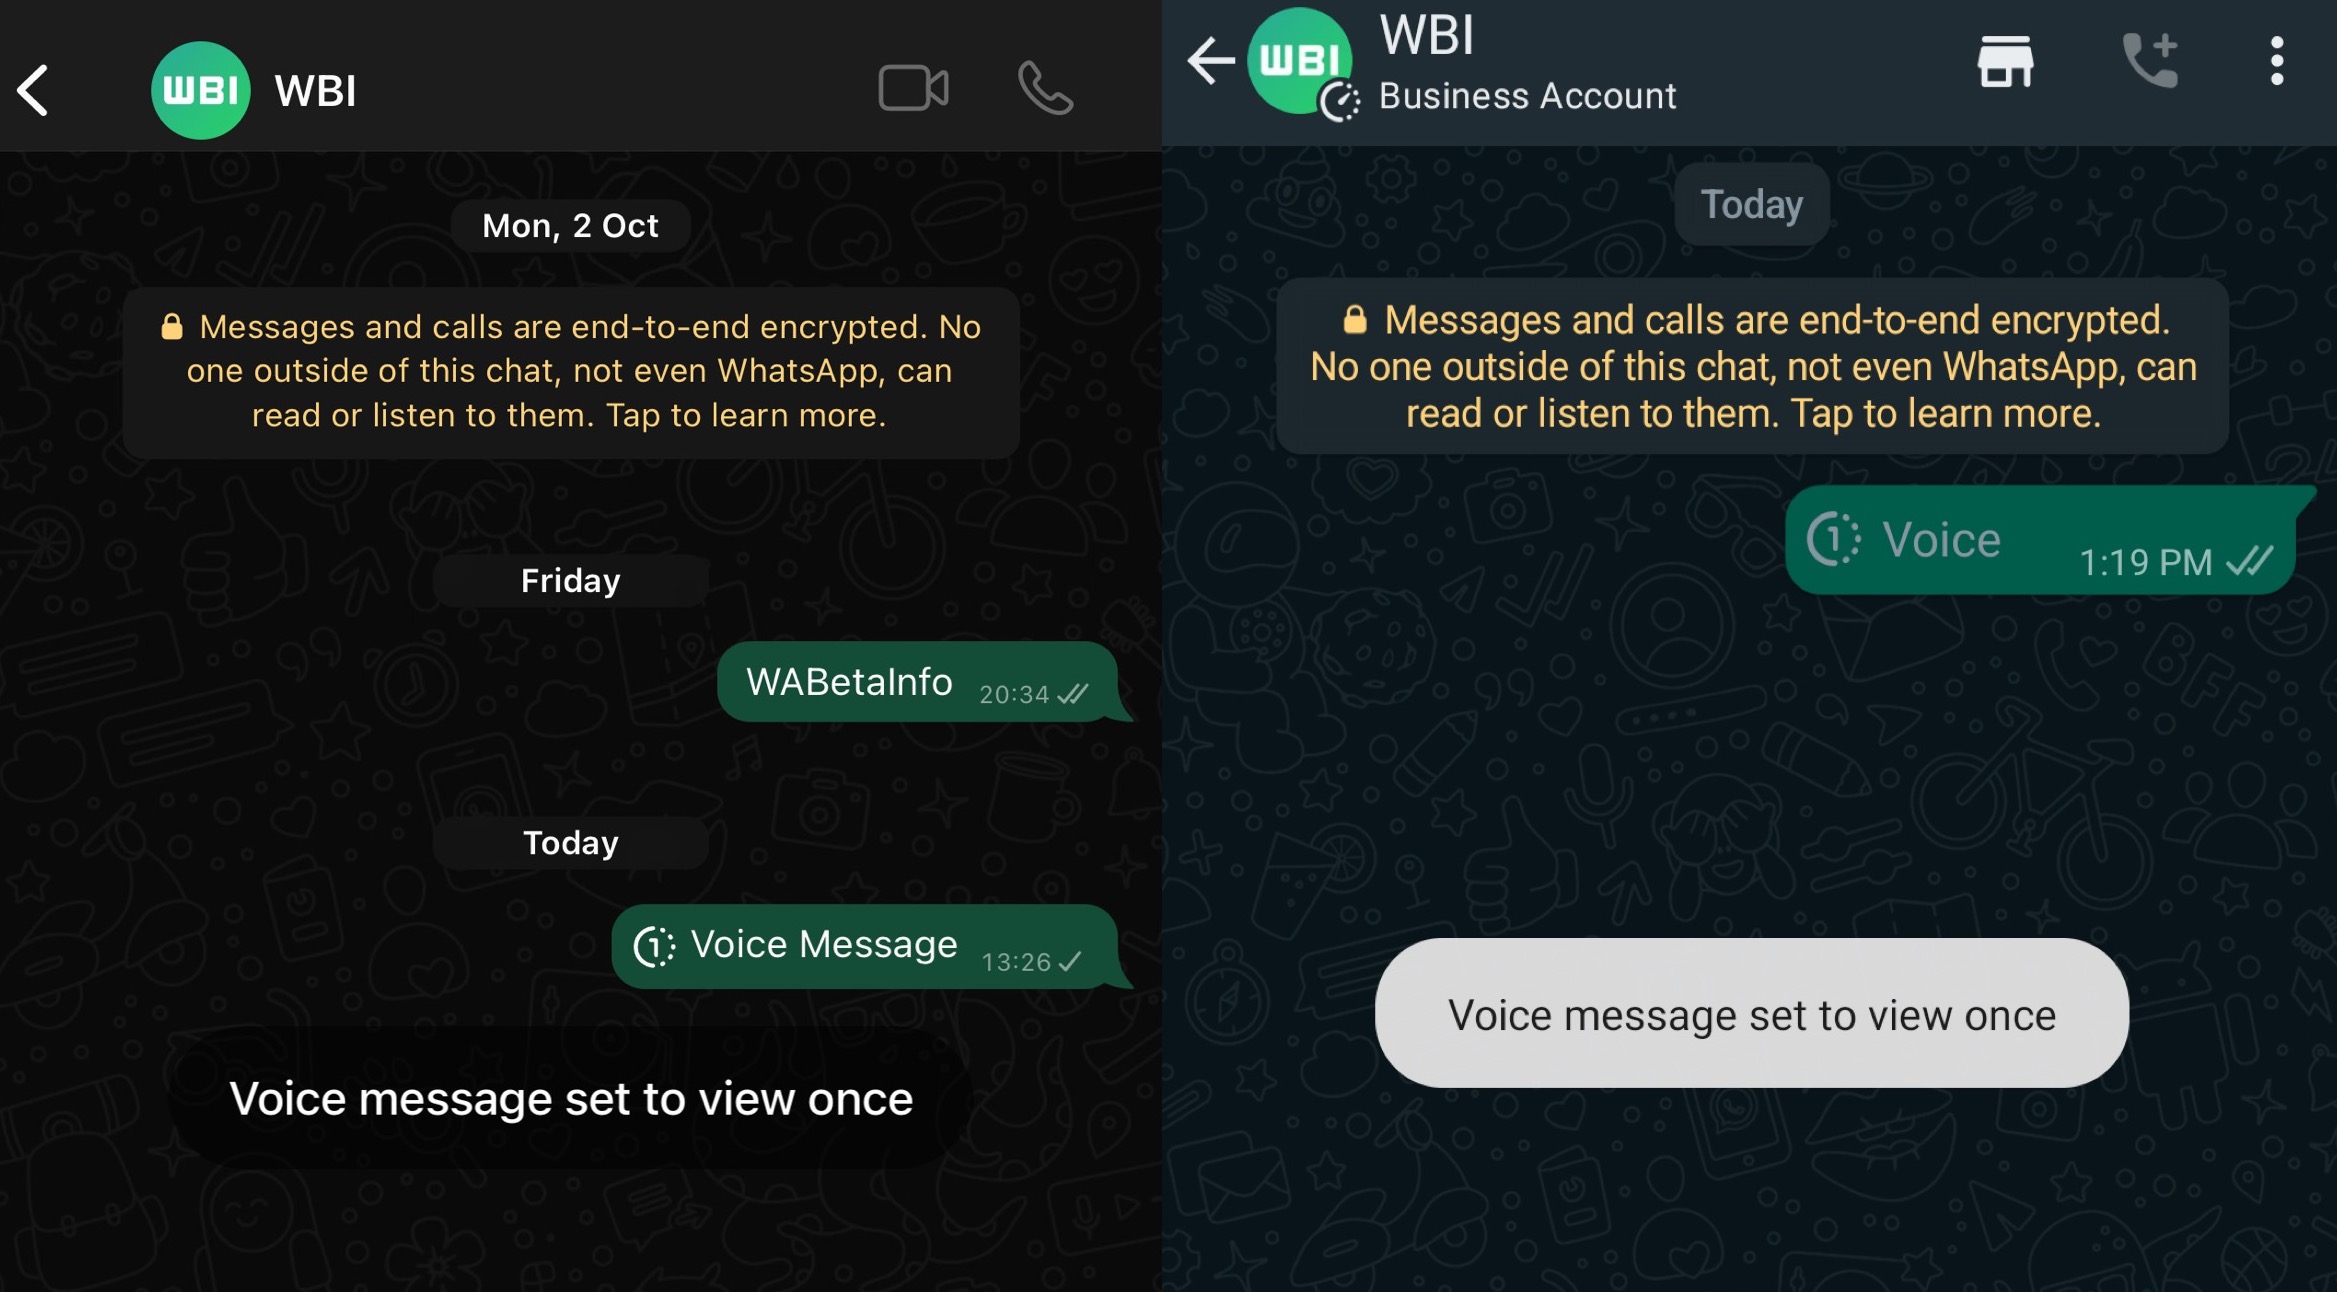 WhatsApp Tests New View Once Mode for Voice Messages, Enhancing User Privacy